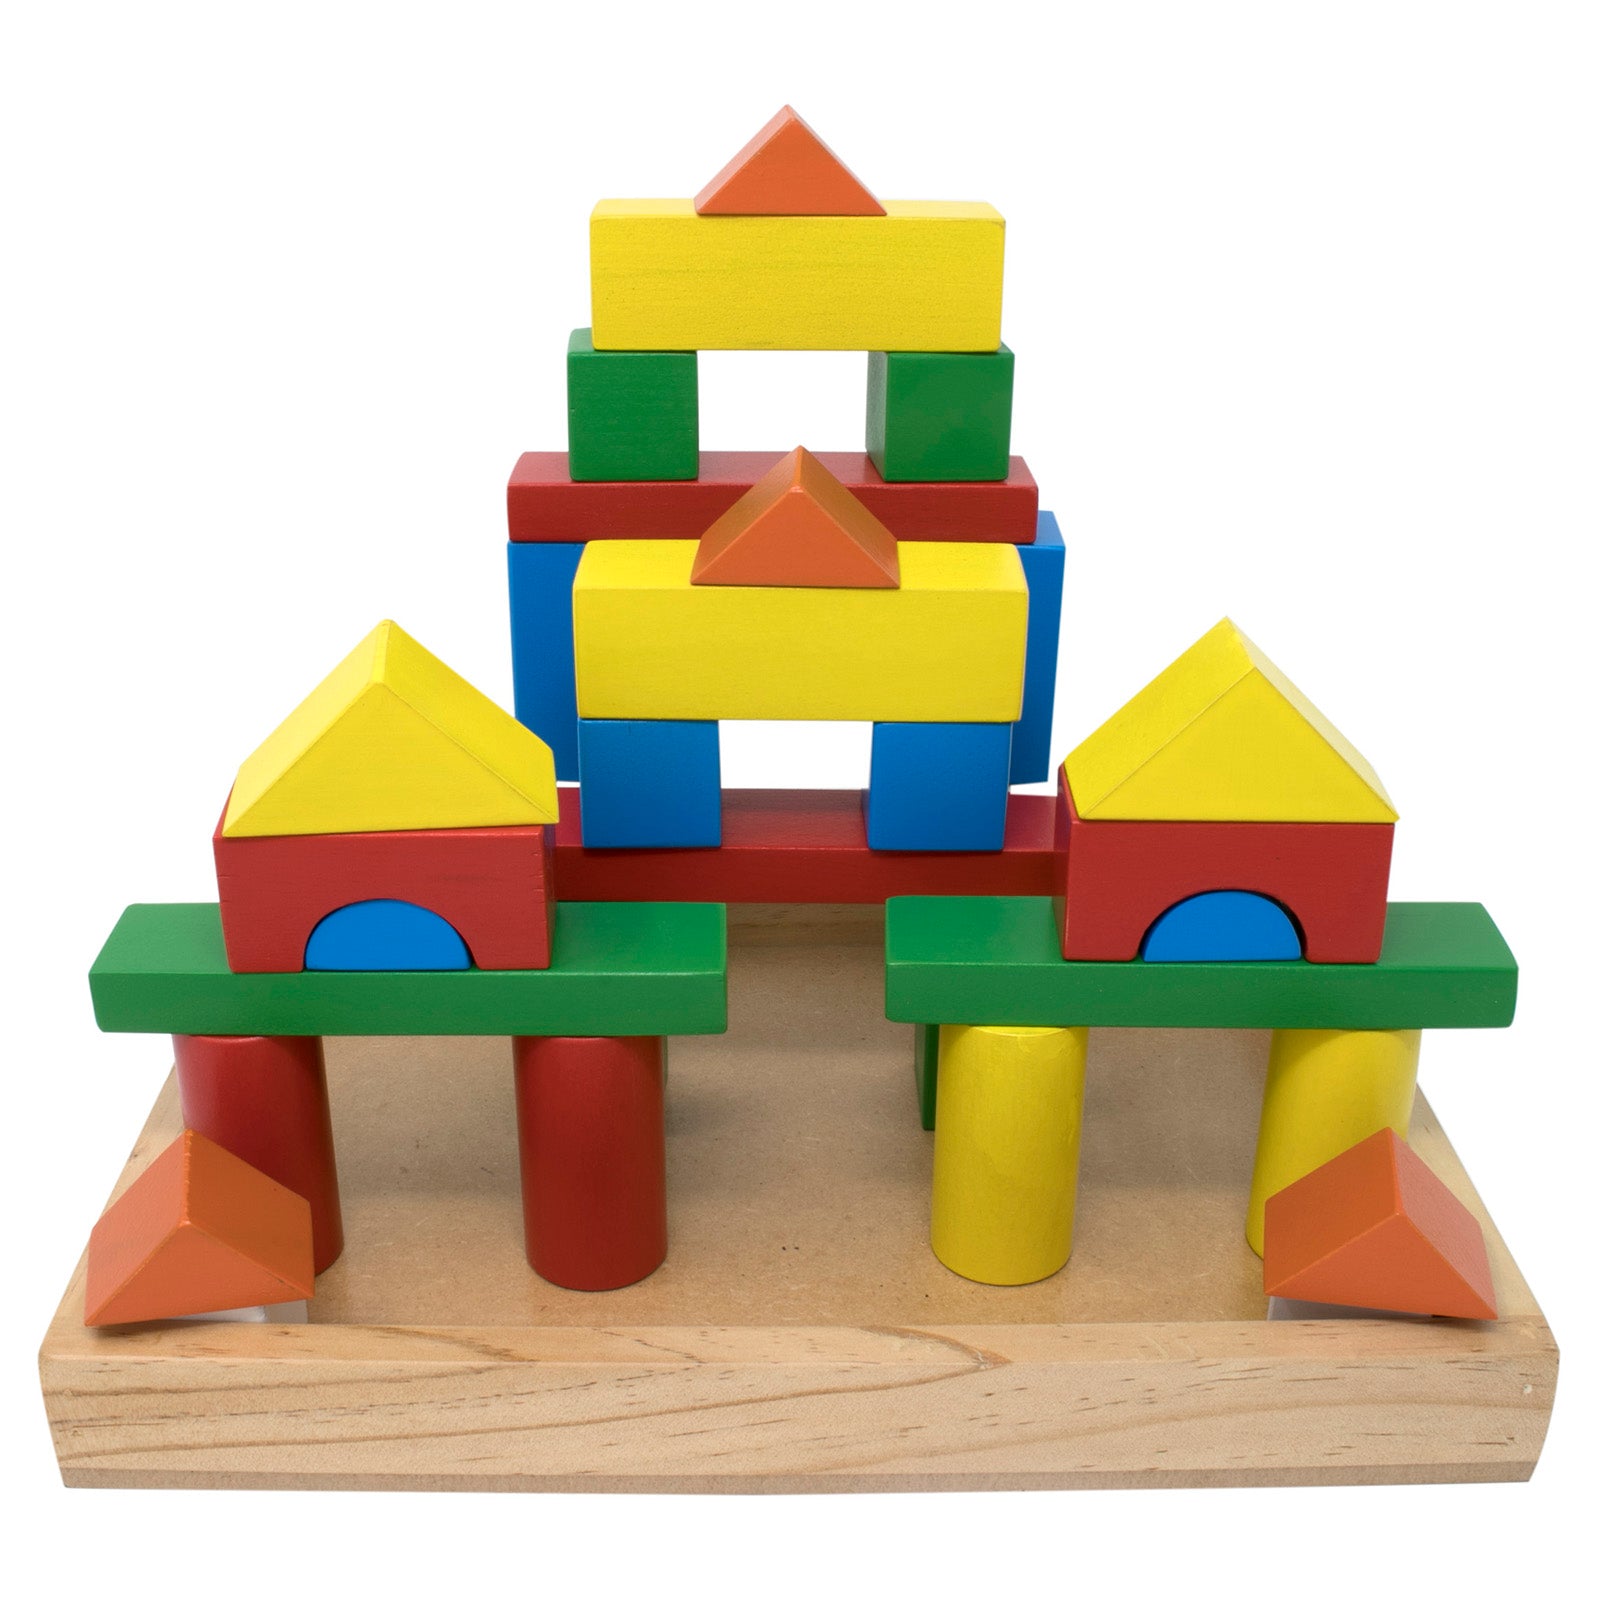 Building Blocks - Early Learning Wooden Toy / Educational Toy